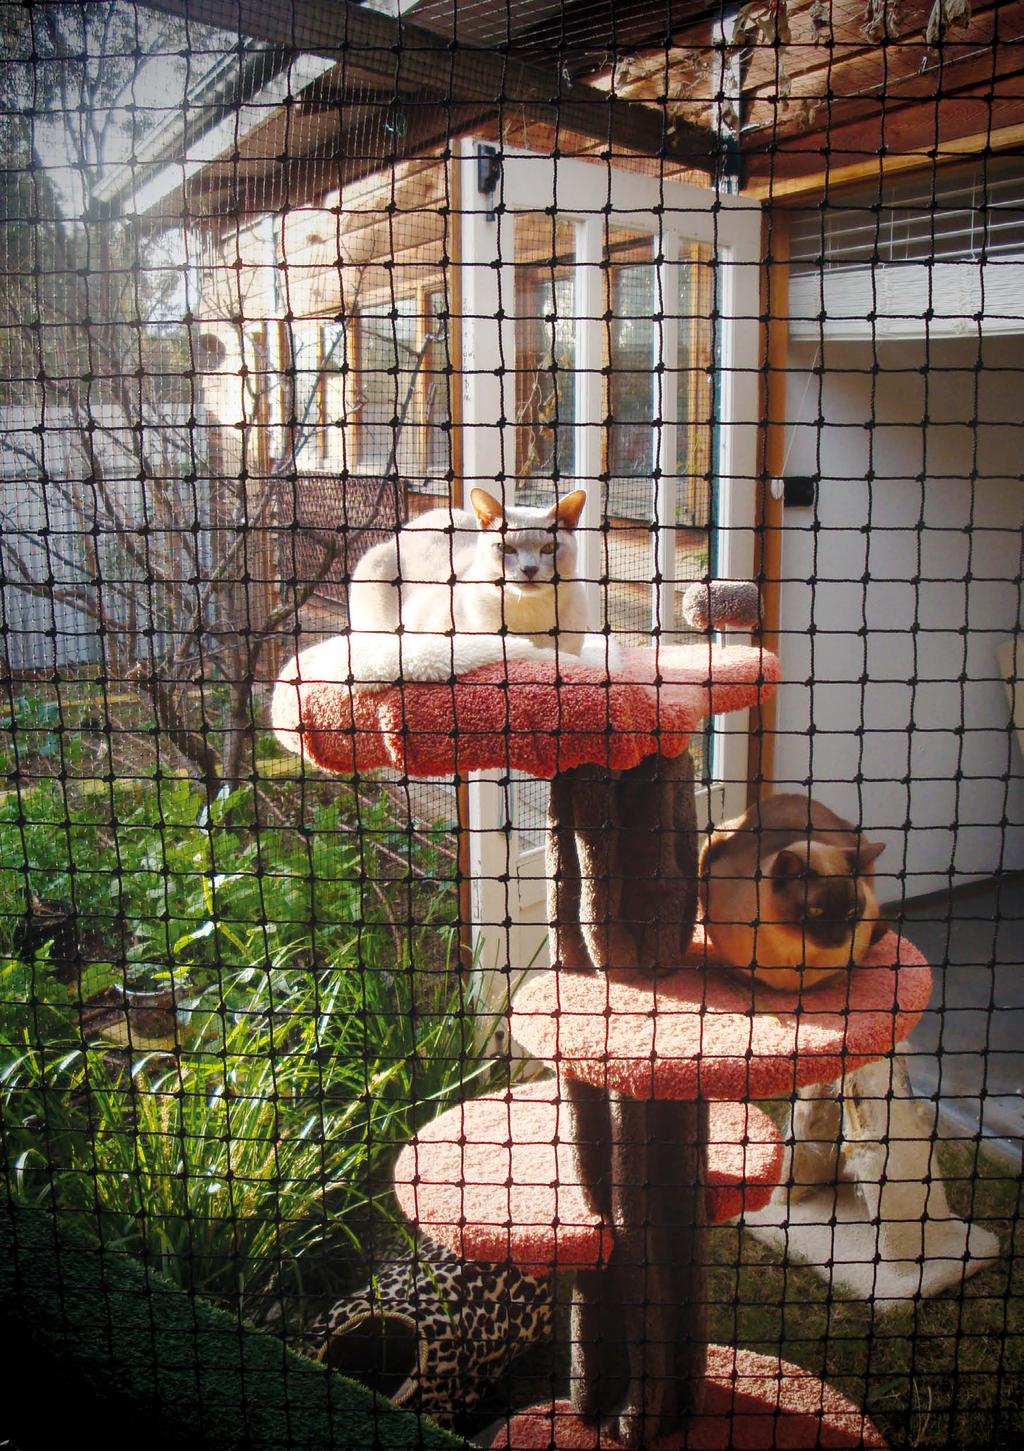 Making enclosures interesting Additional sights and sounds Some cats love to watch birds (you can place a bird bath/feeder outside the window or enclosure), insects (try planting flowers to attract